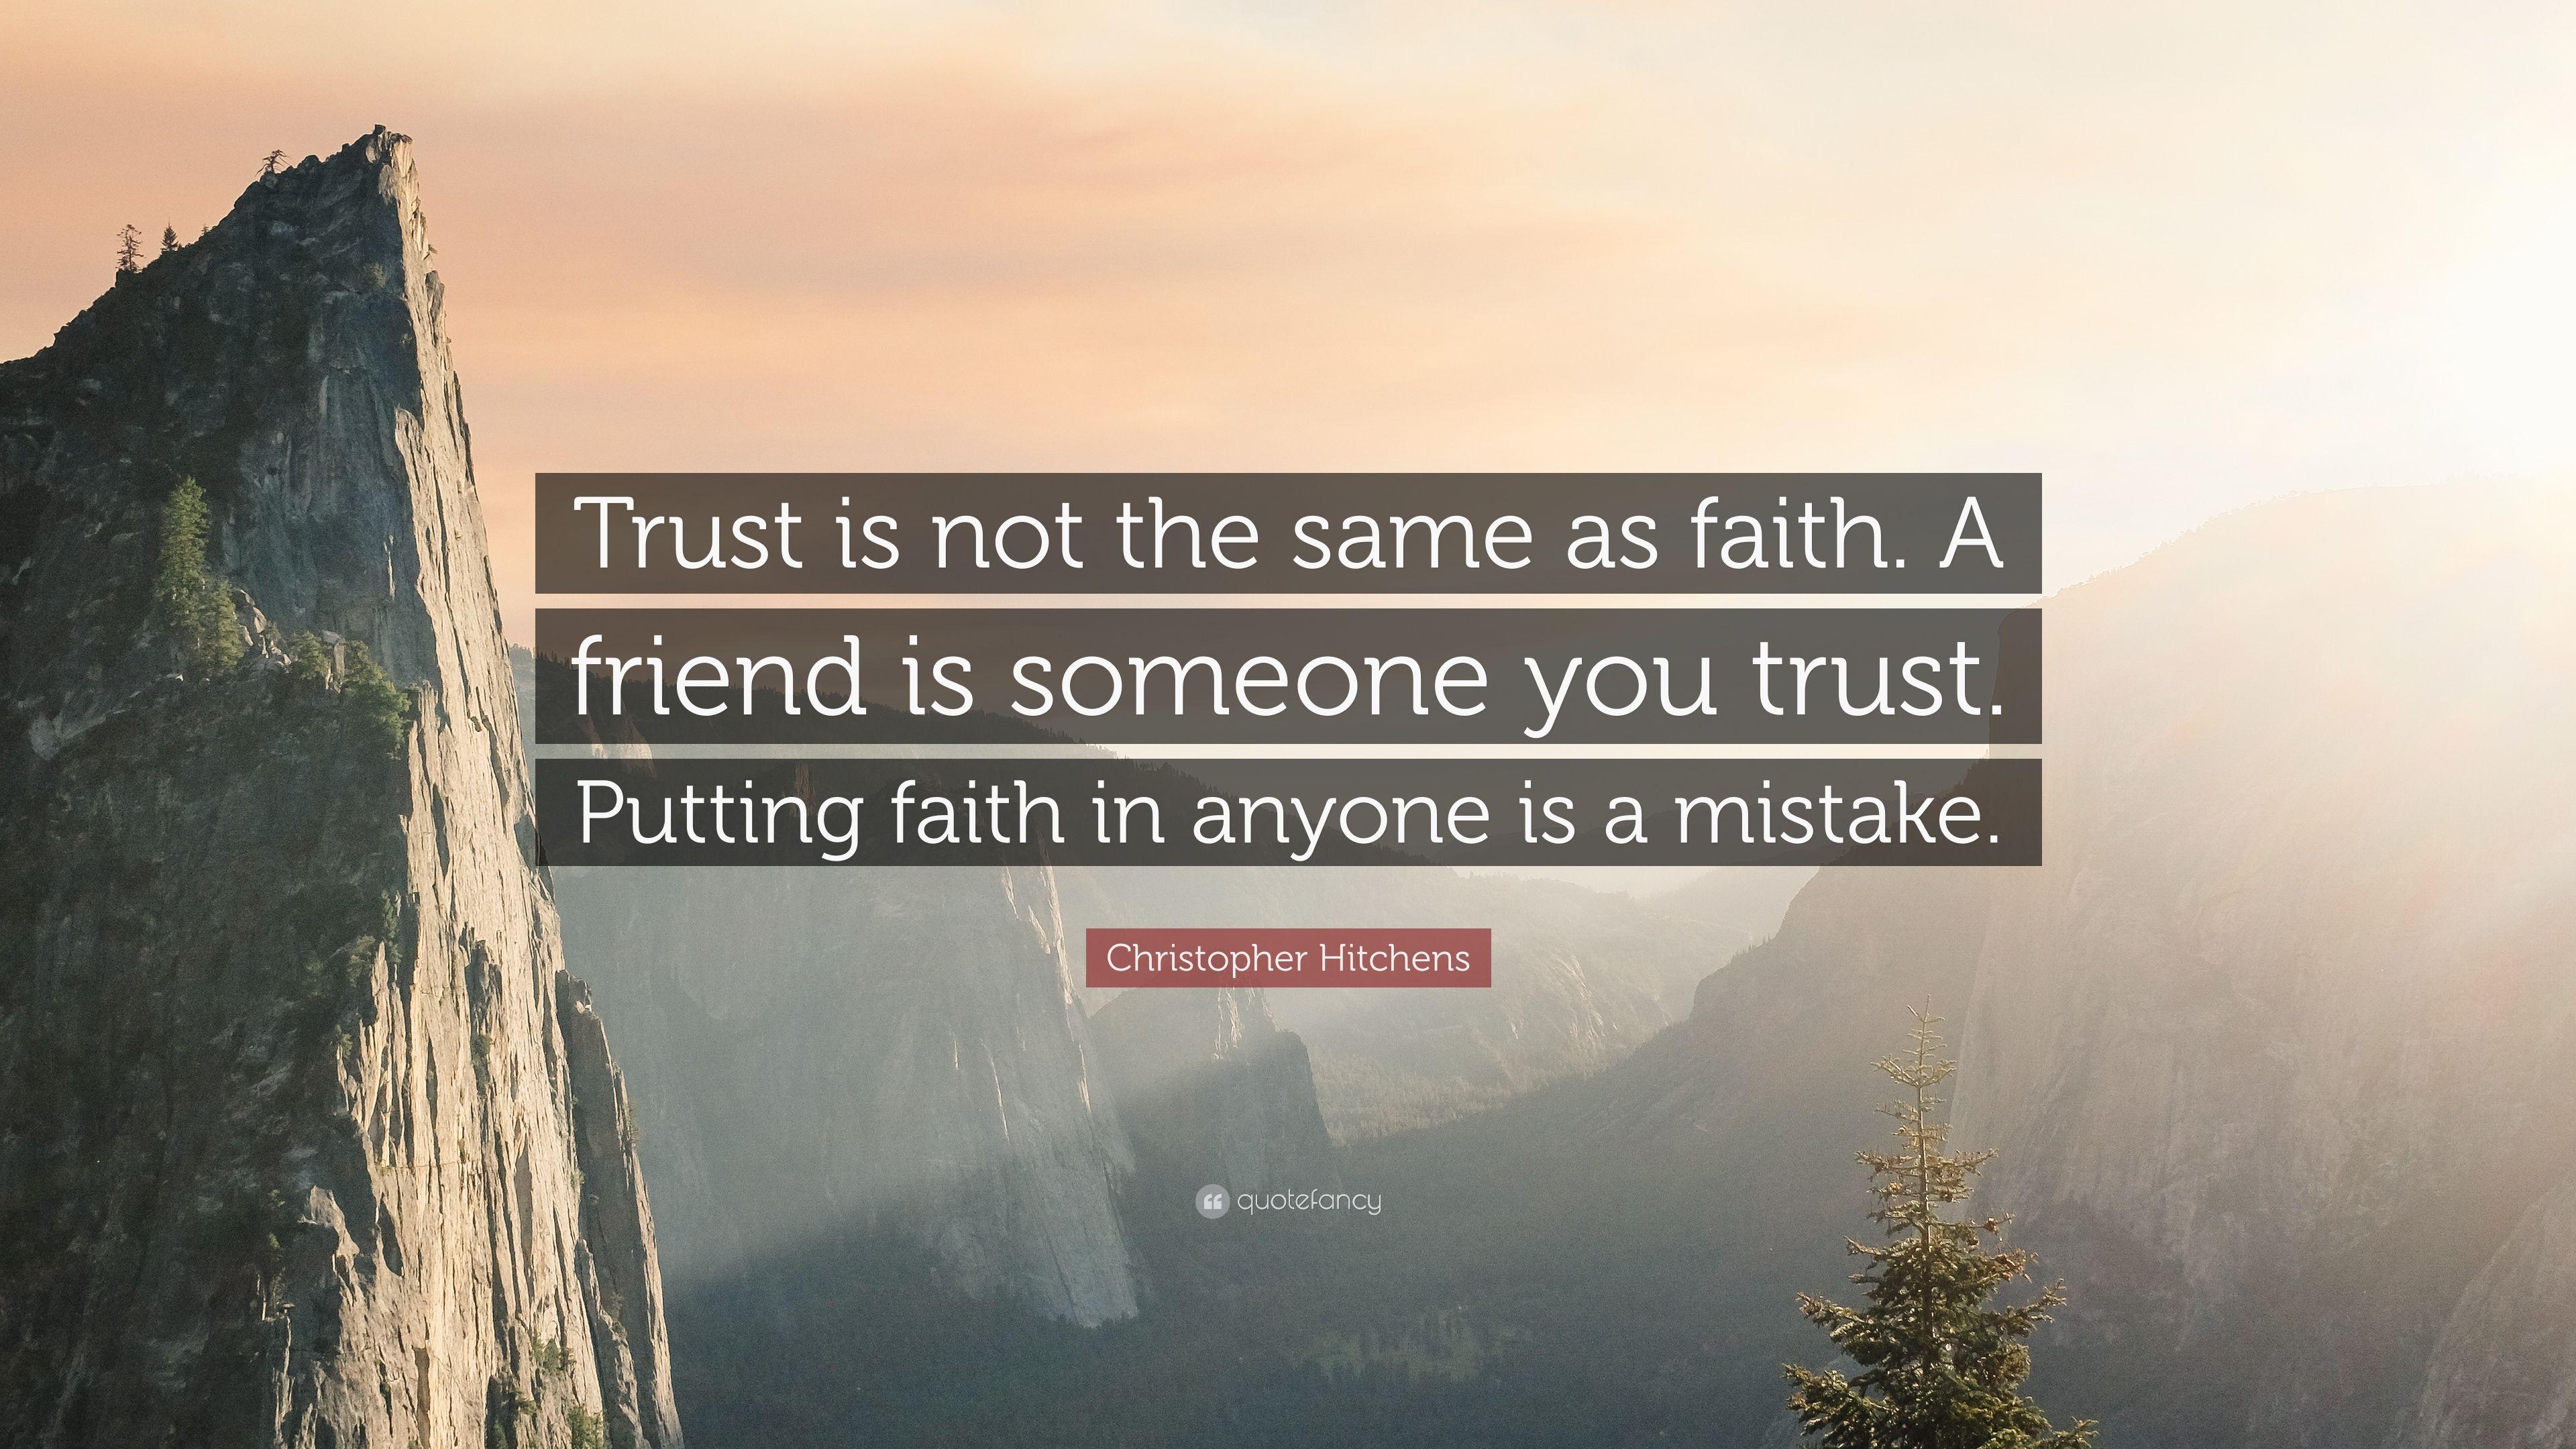 Christopher Hitchens Quote: “Trust is not the same as faith. A